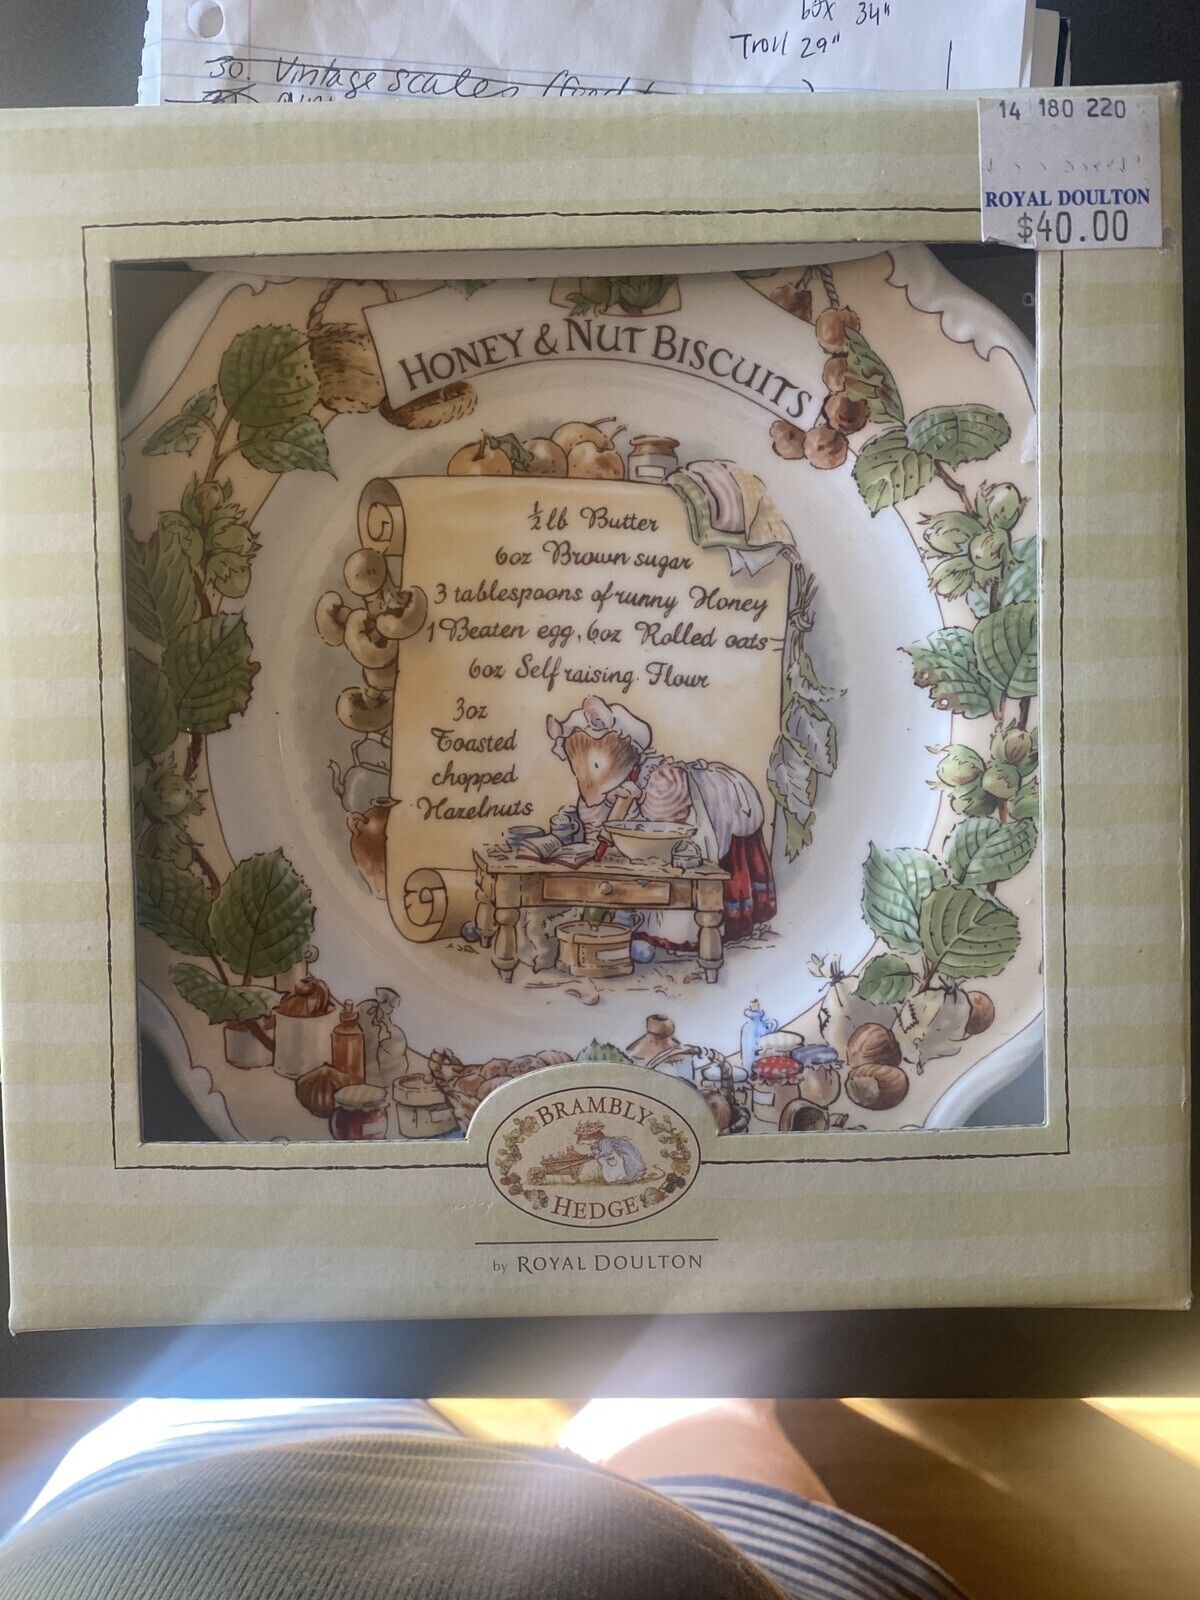 New In Box Royal Doulton BRAMBLY HEDGE Recipe Plate Honey & Nut Biscuits